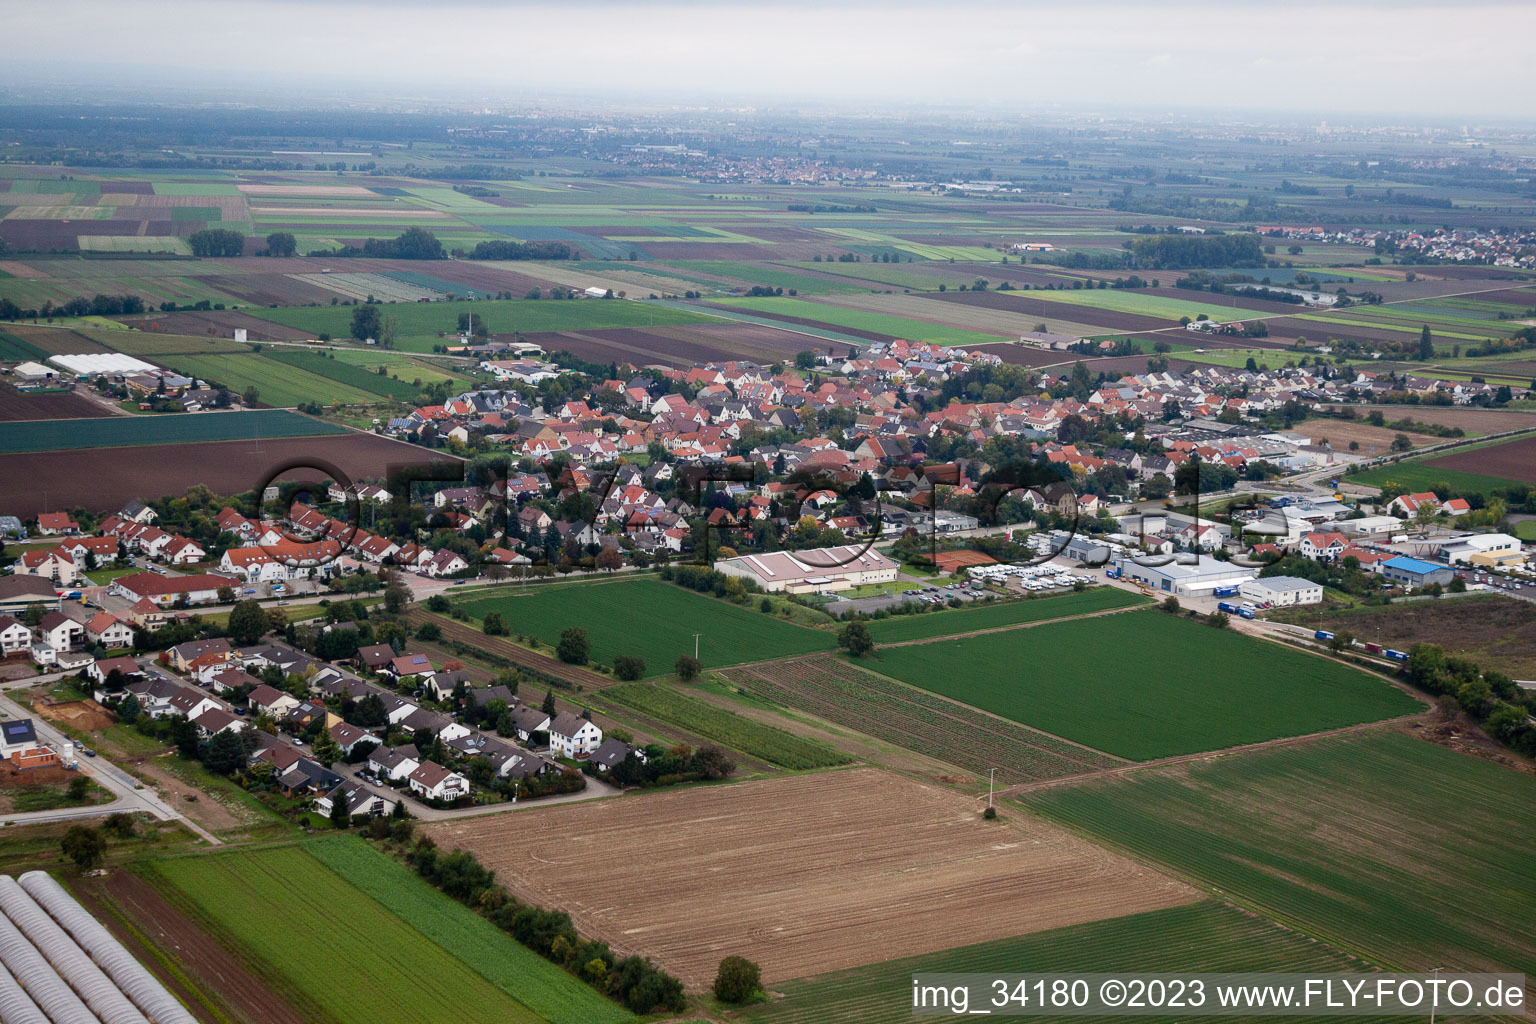 Hochdorf-Assenheim in the state Rhineland-Palatinate, Germany viewn from the air